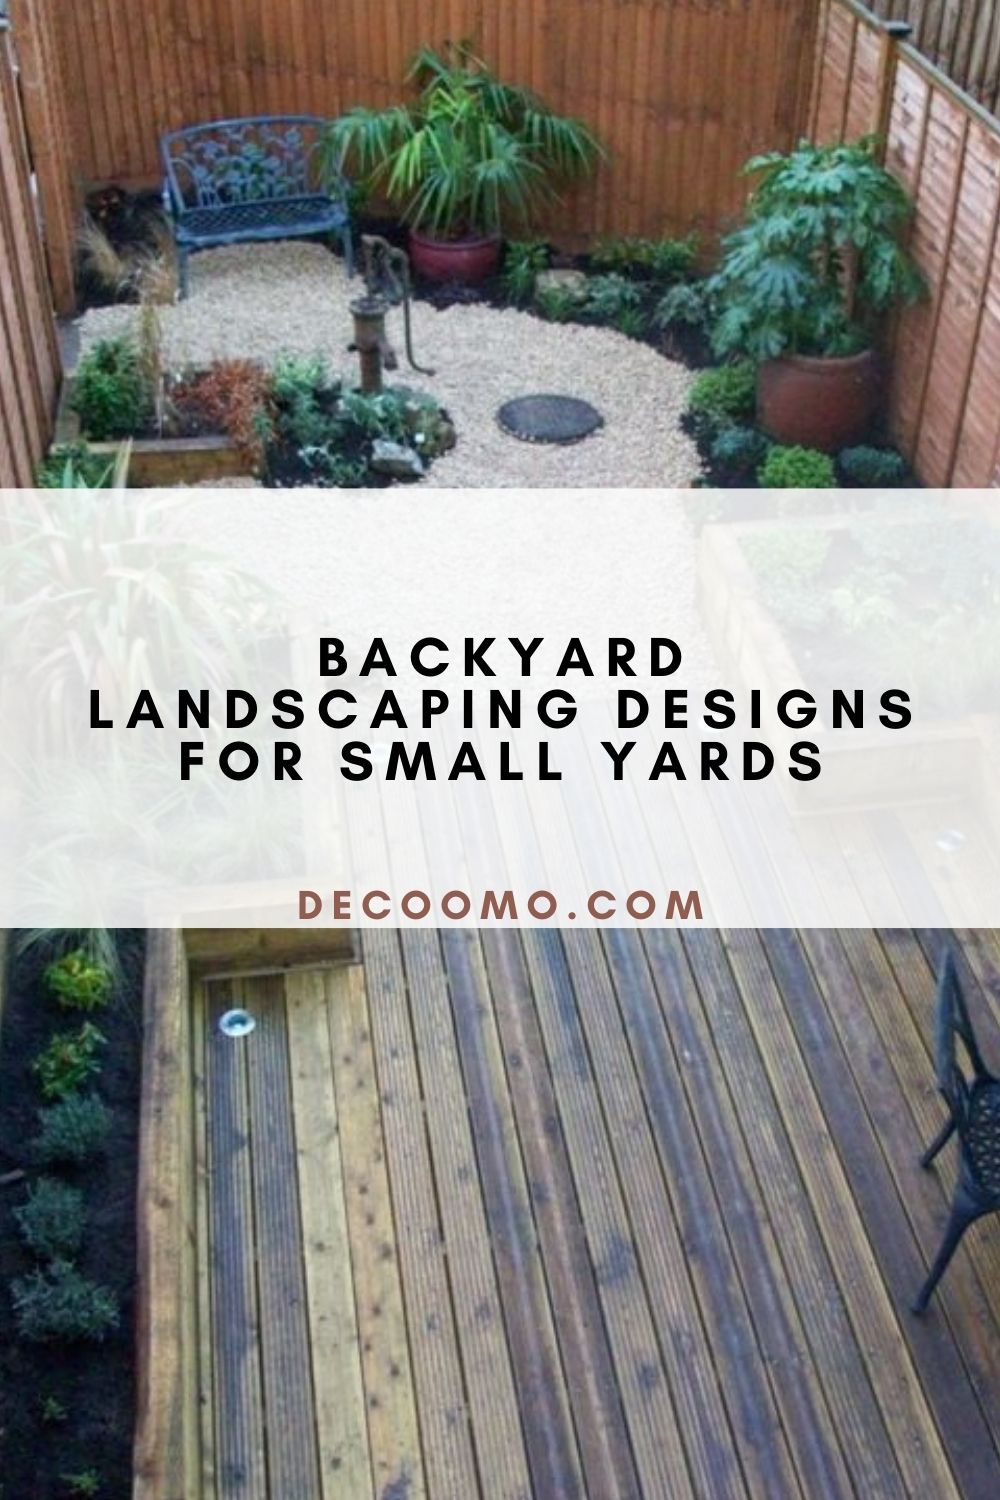 Backyard Landscaping Designs For Small Yards - DECOOMO